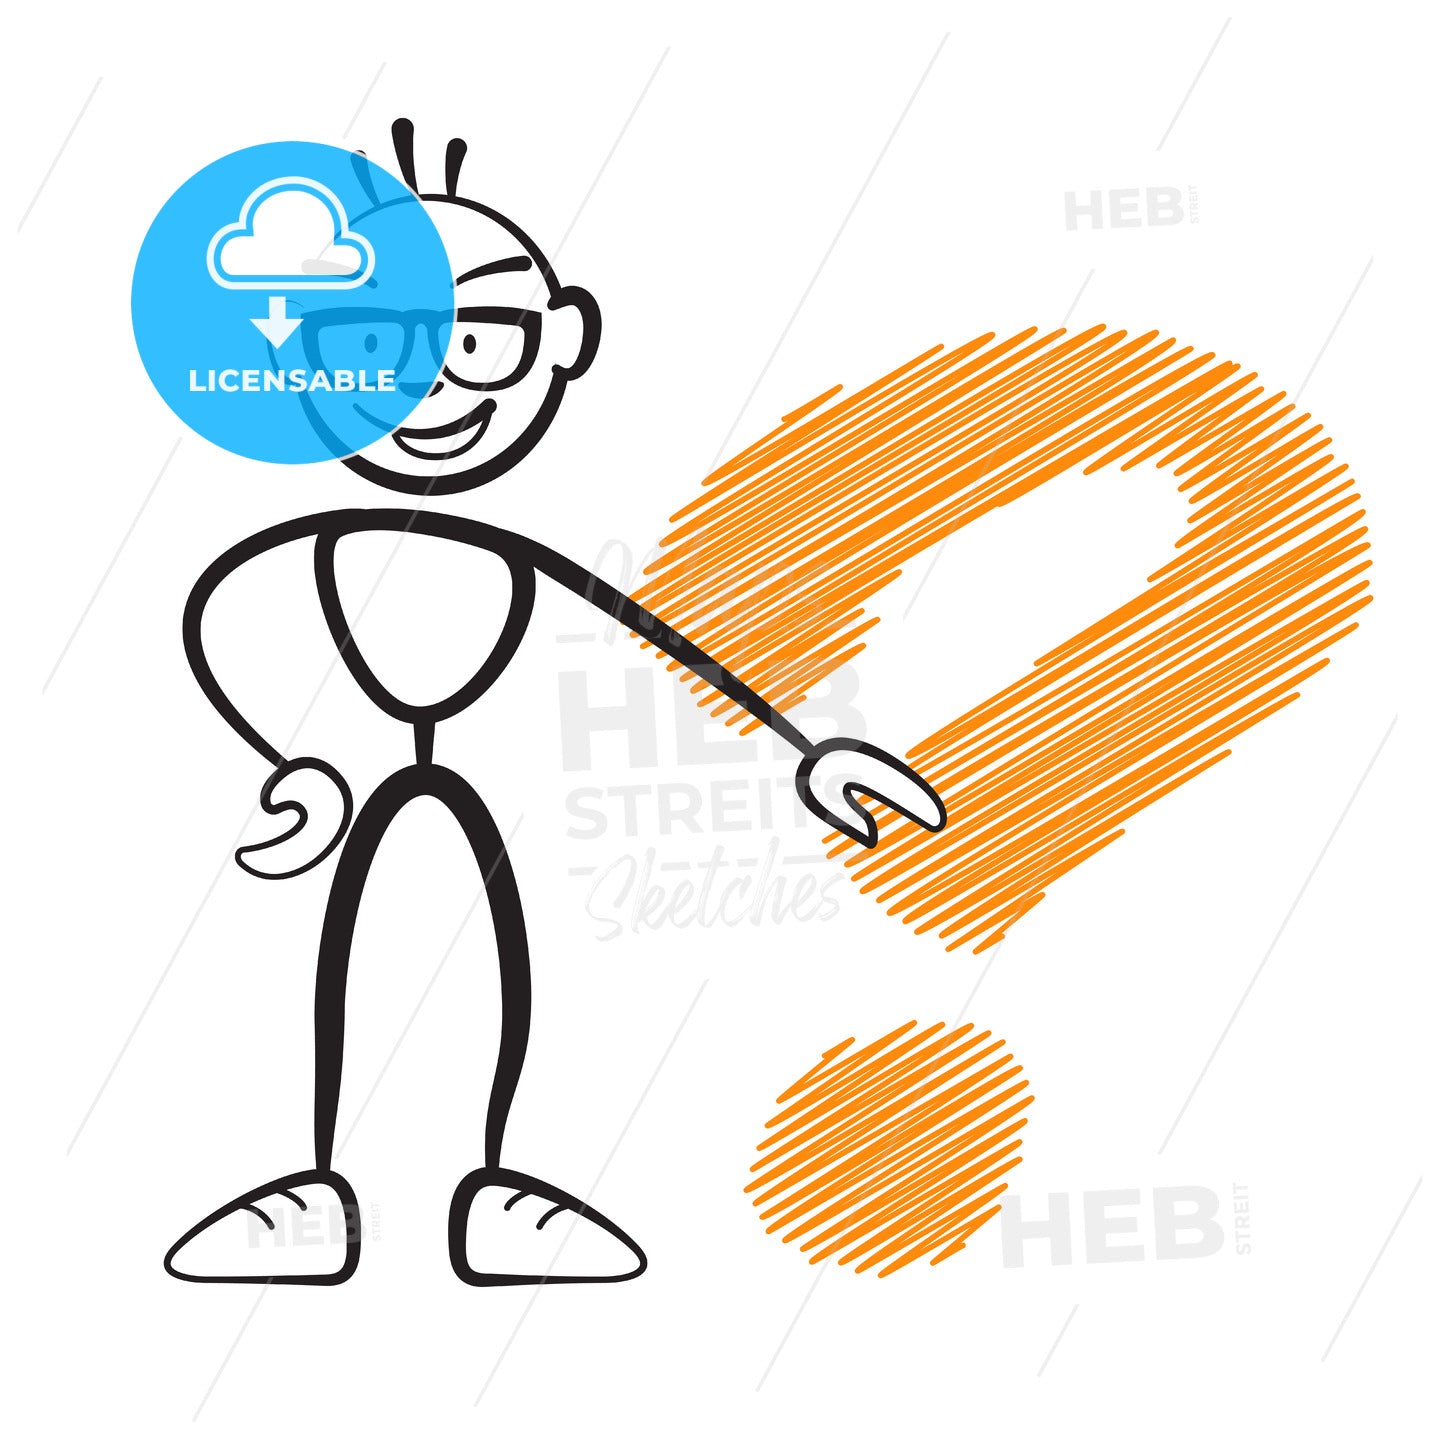 Stickmen with questionmark sign – instant download